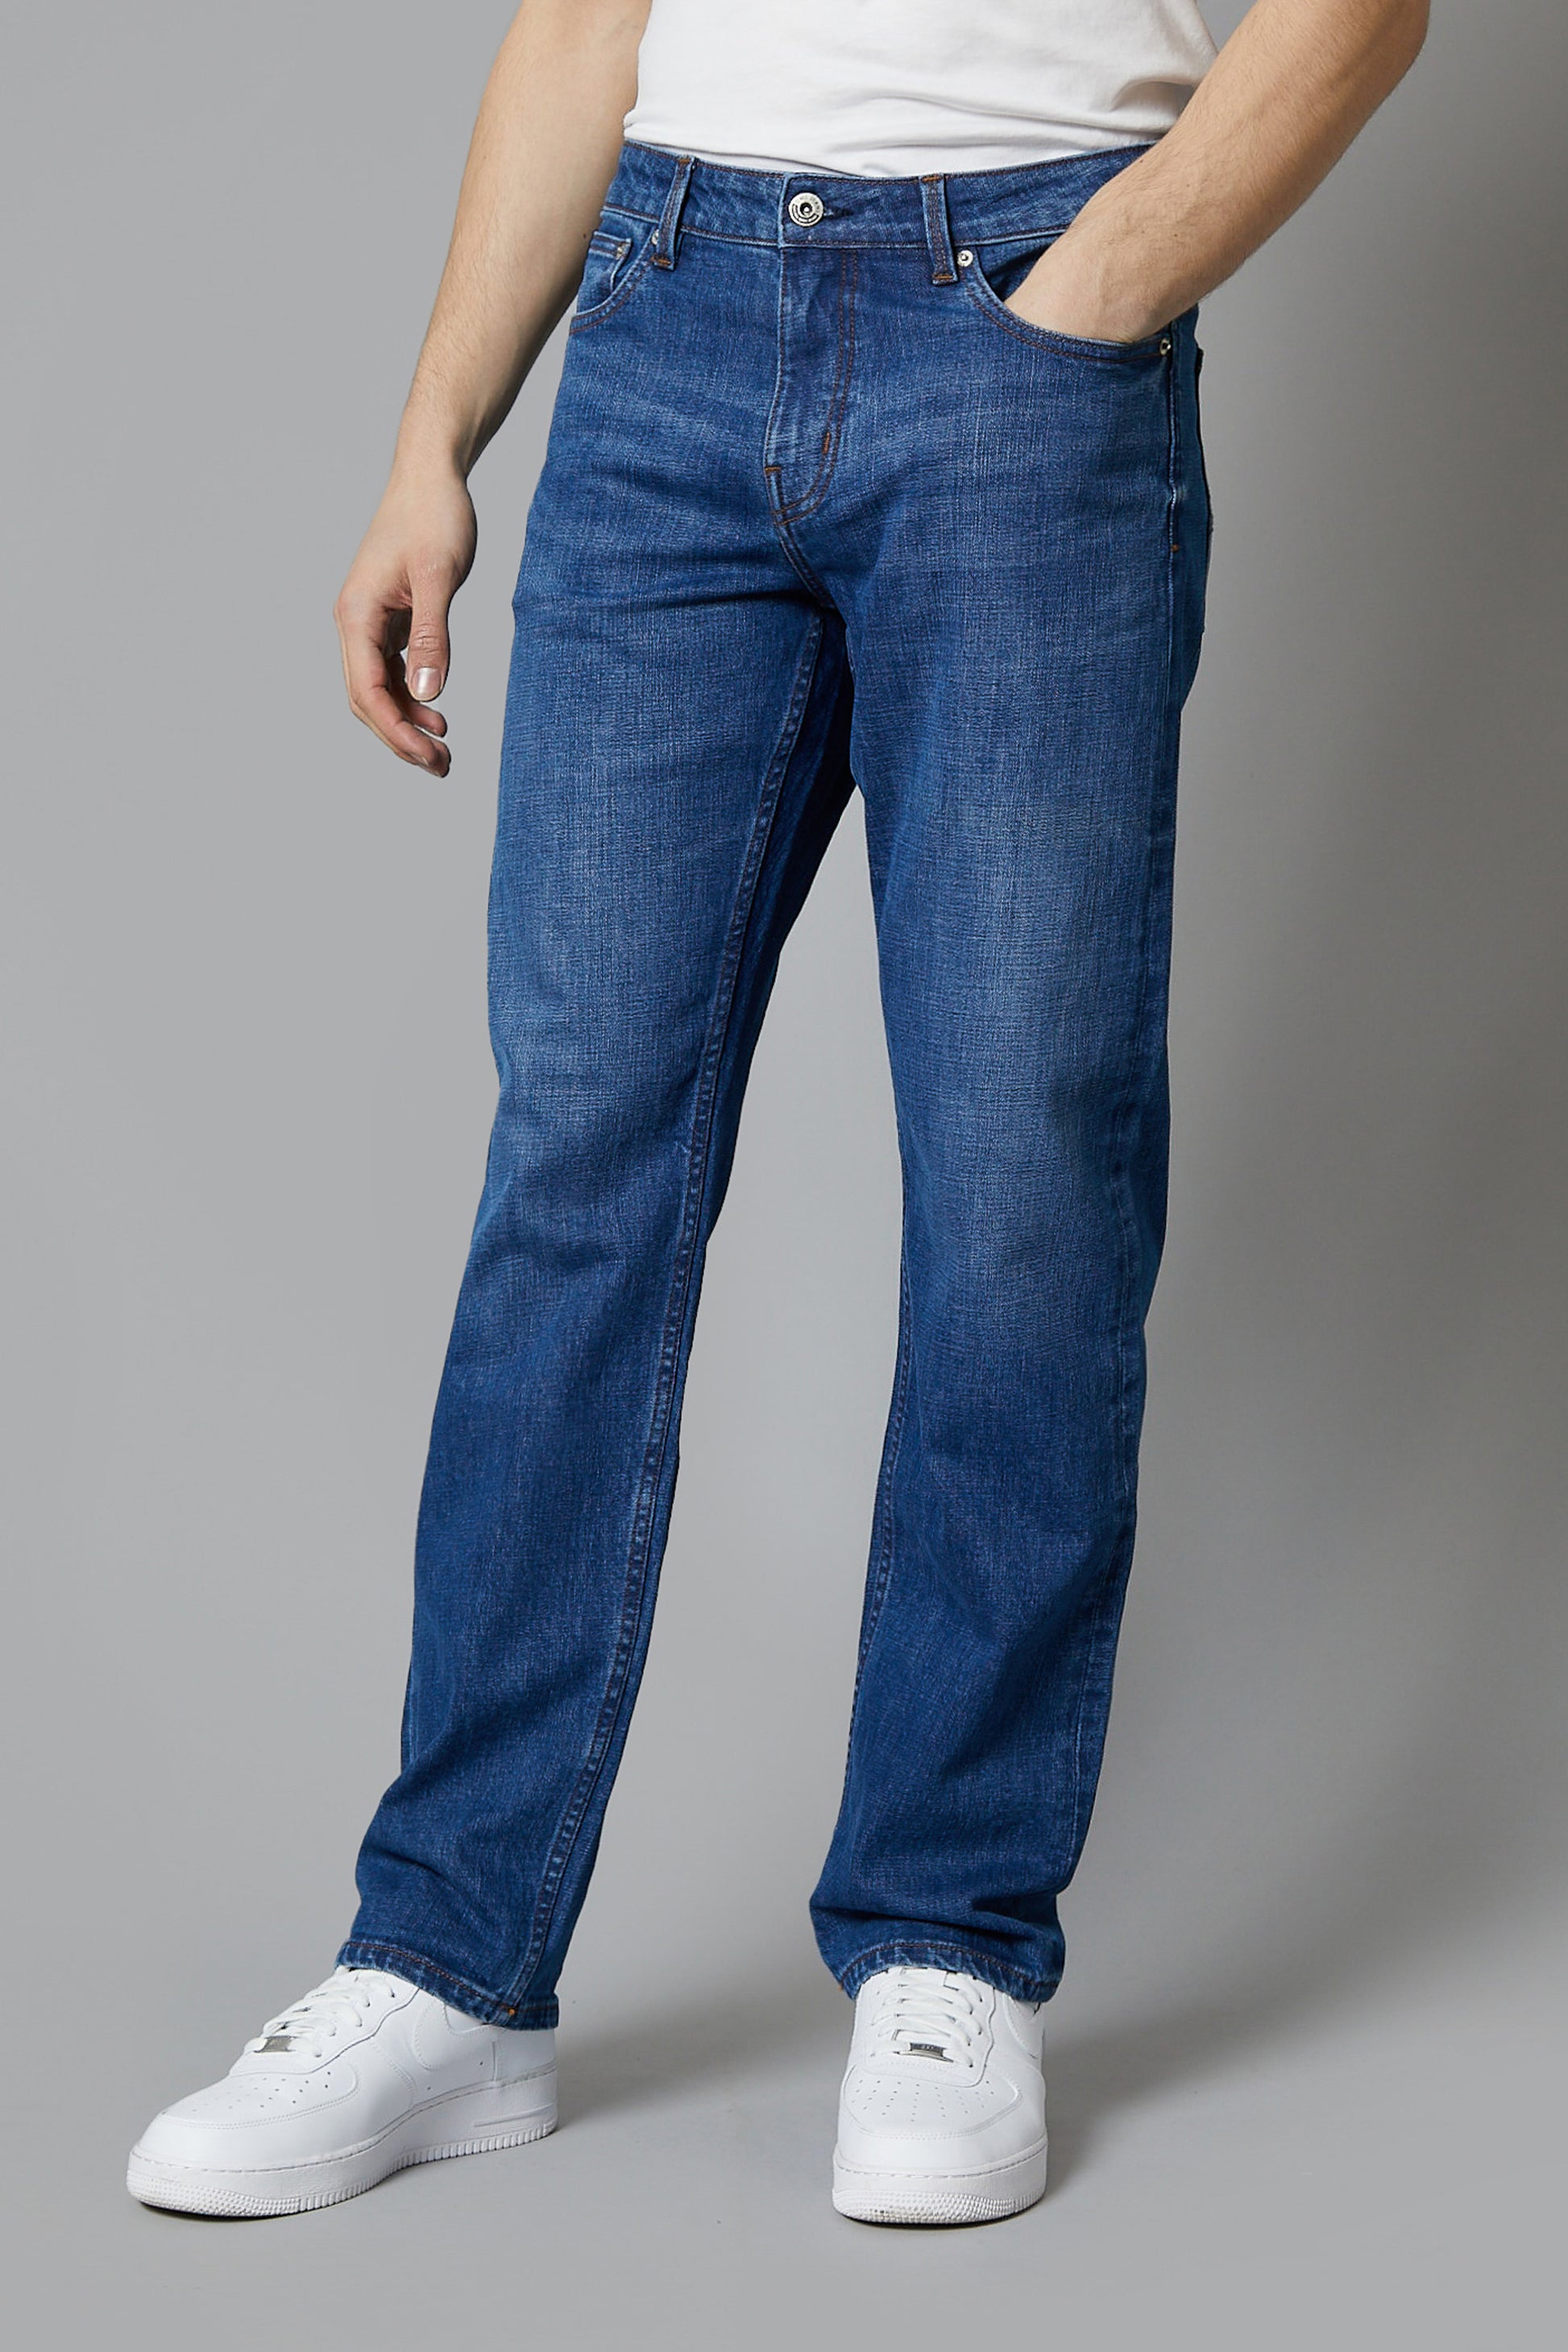 DML Jeans Montana Loose Fit Jeans In Mid Blue Comfort Stretch